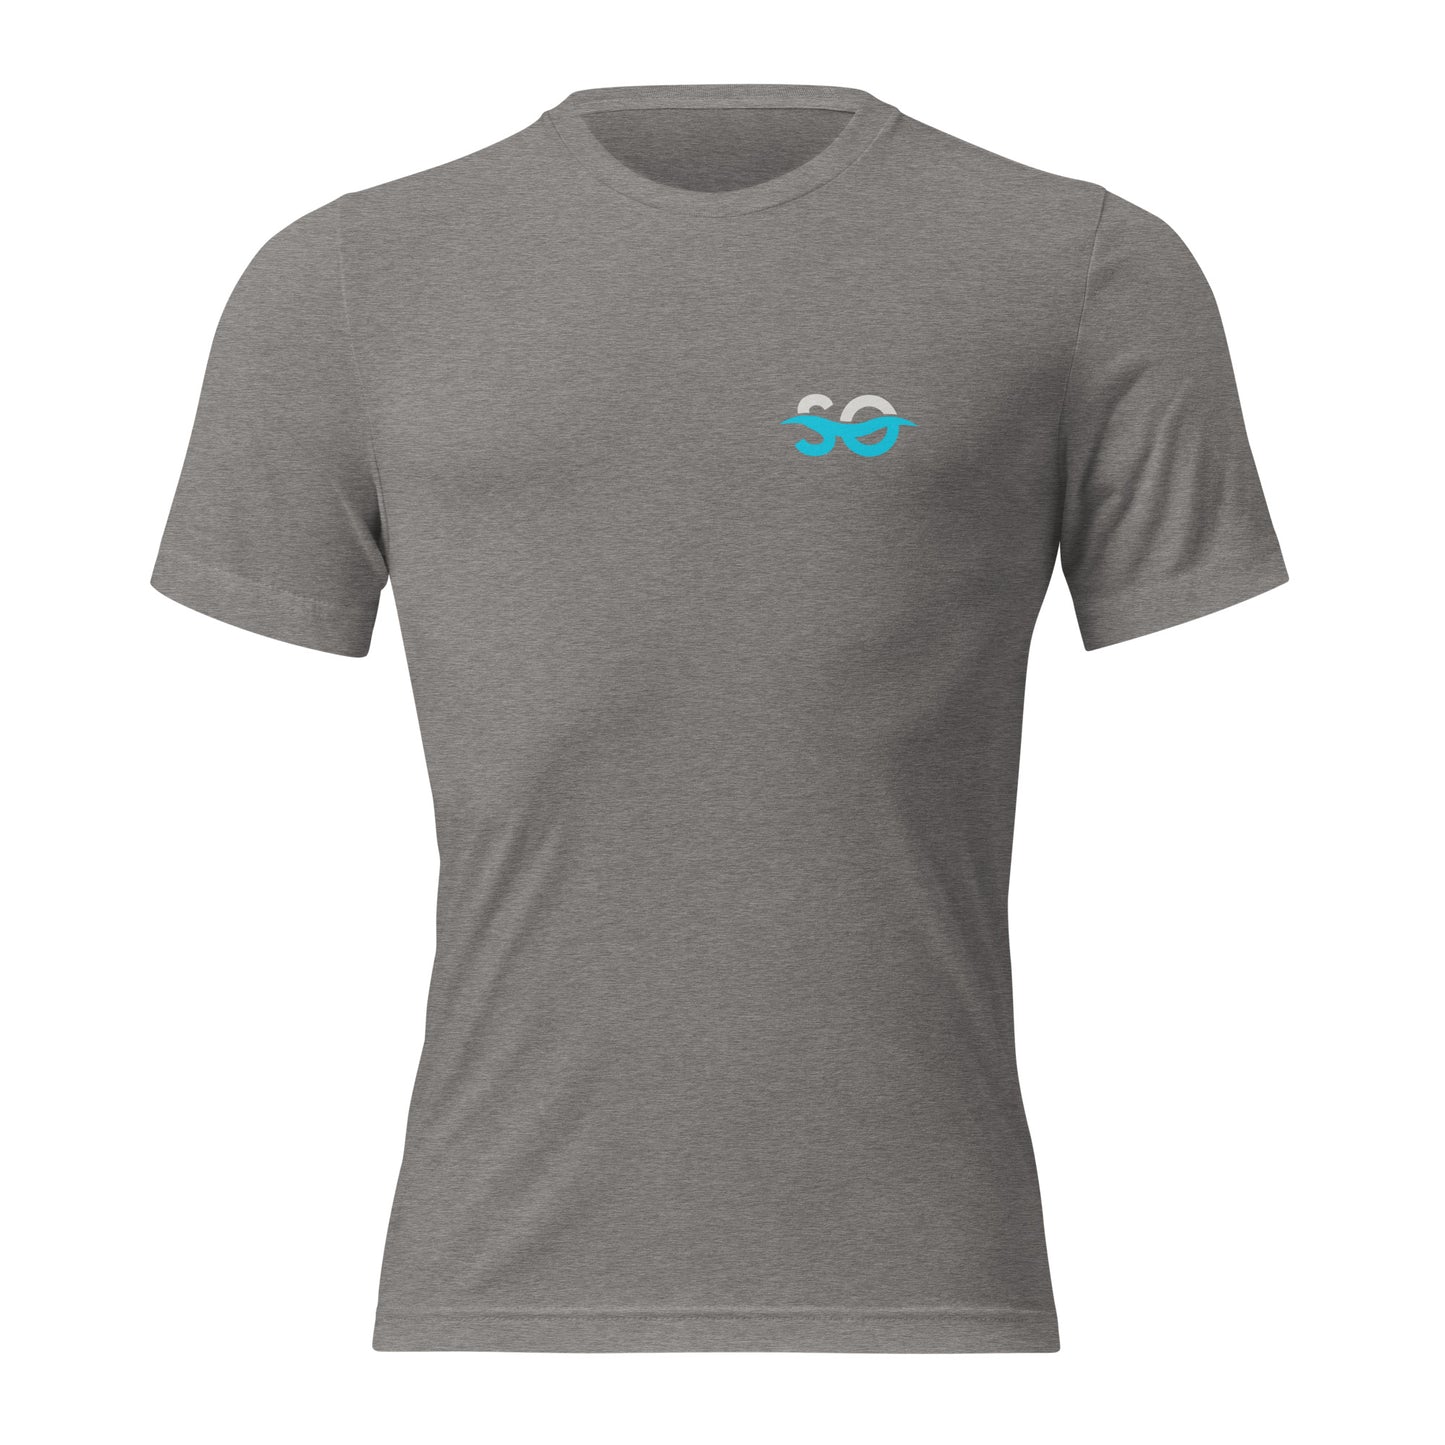 a grey shirt with a blue logo on the chest